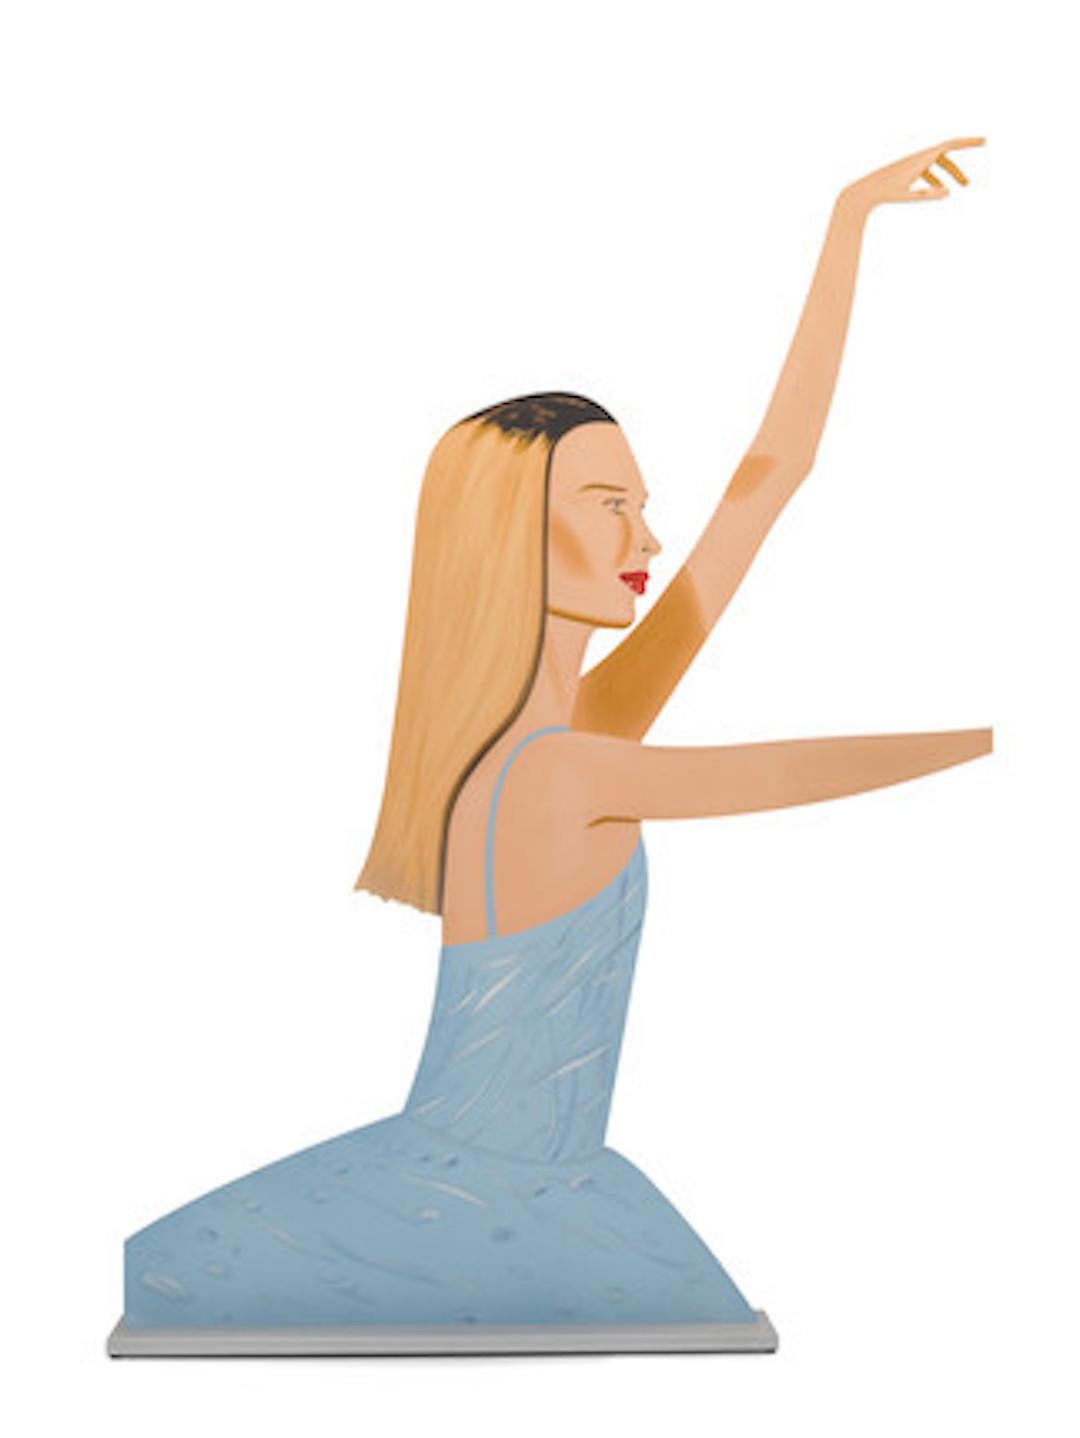 ALEX KATZ (1927-Present)

Katz' 2020 'Dancer 2' is a cutout with UV-cured archival inks on shaped powder-coated aluminum, mounted to aluminum base. Incised 'Alex Katz', dated and numbered 56/60, with the stamp of the publisher Lococo Fine Art